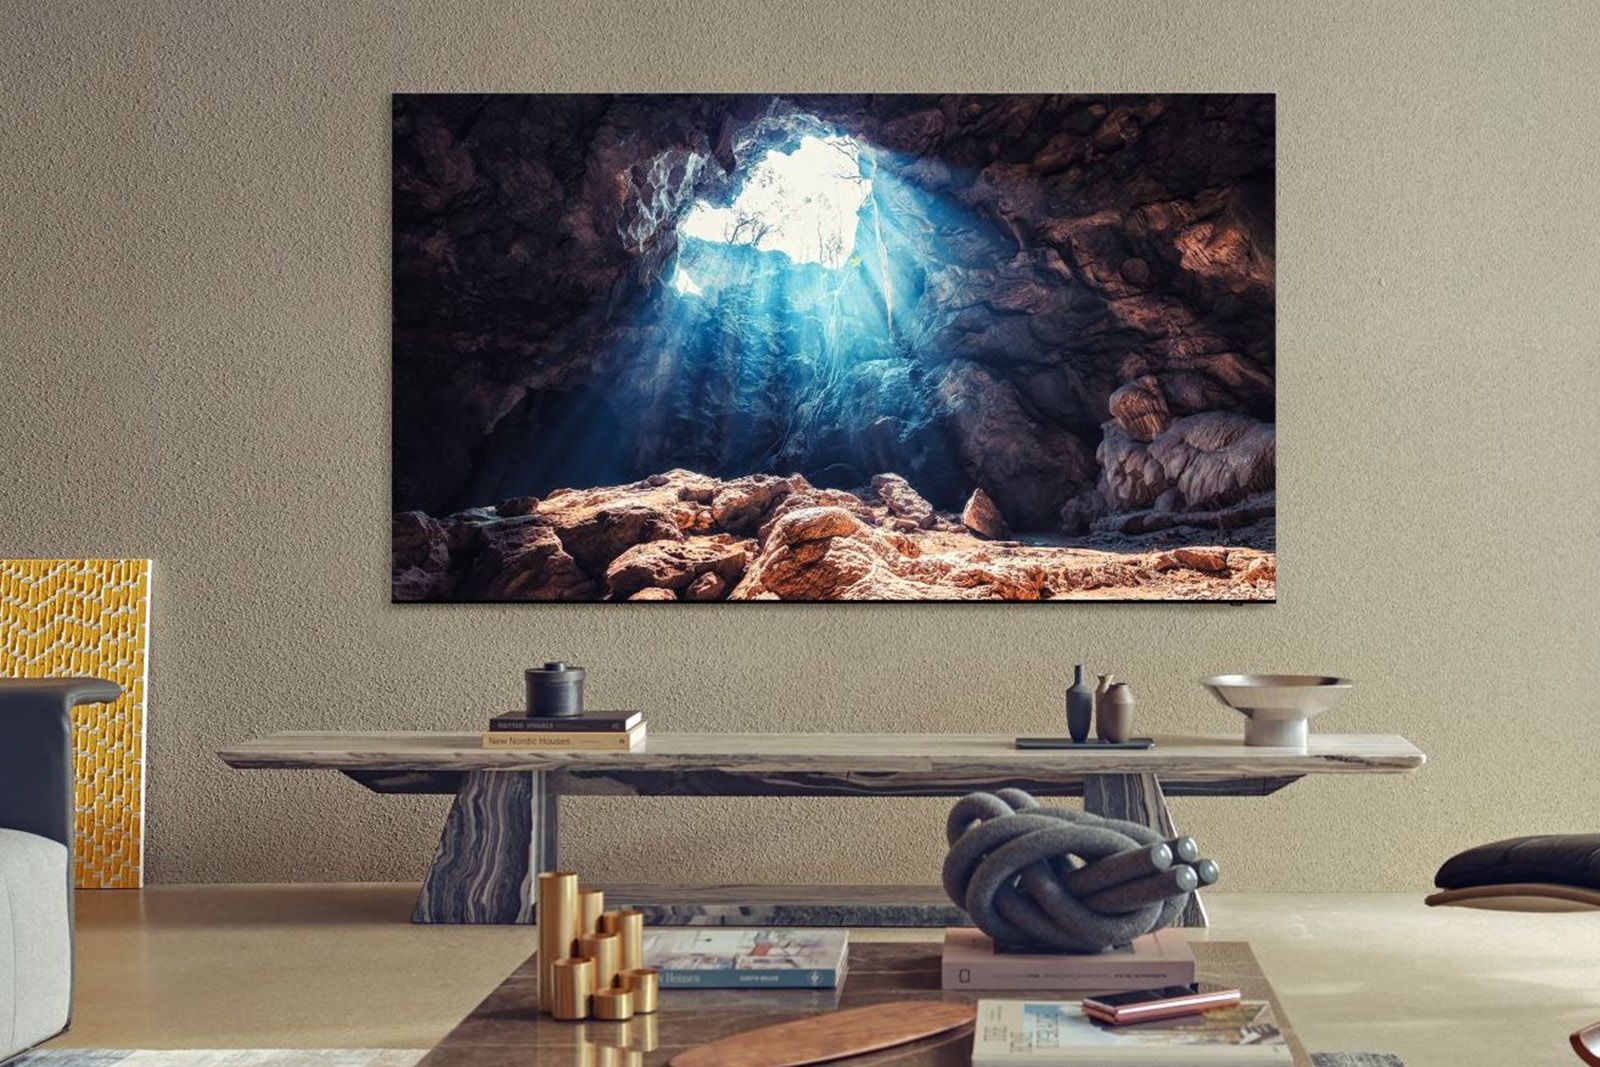 Samsung QN95A Neo QLED 4K TV review photo 6